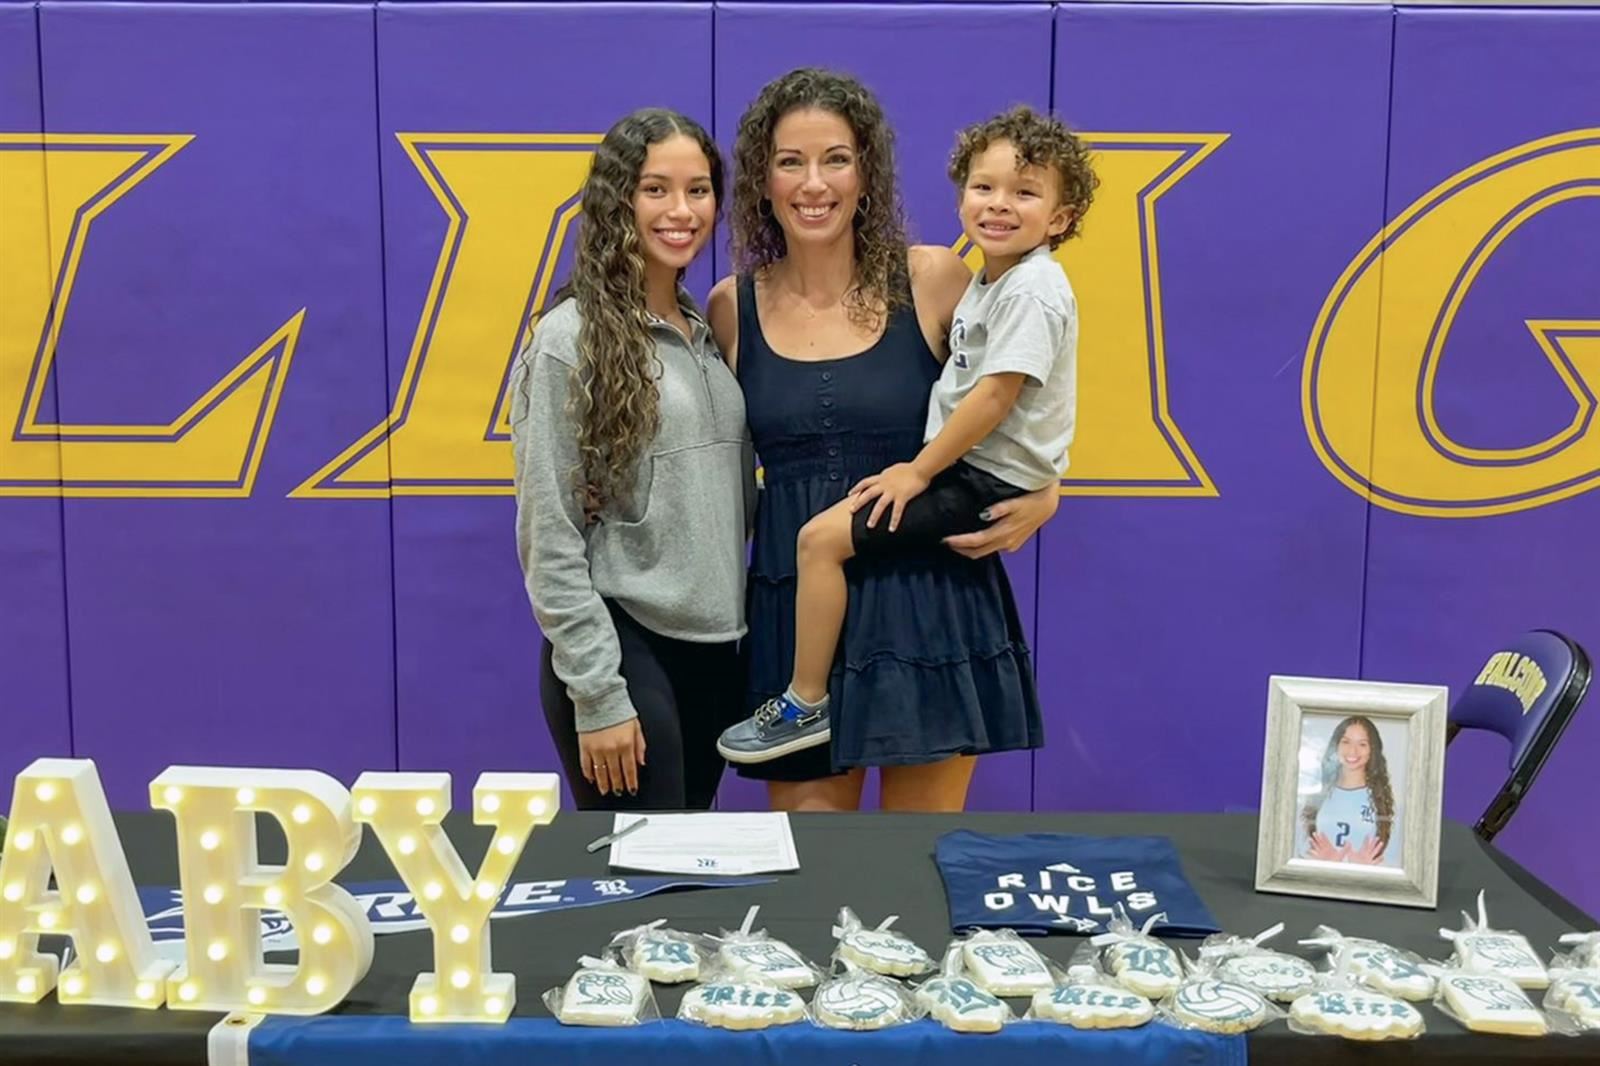 Jersey Village High School senior Gabriela Mansfield, left, signed a letter of intent to play volleyball at Rice University.